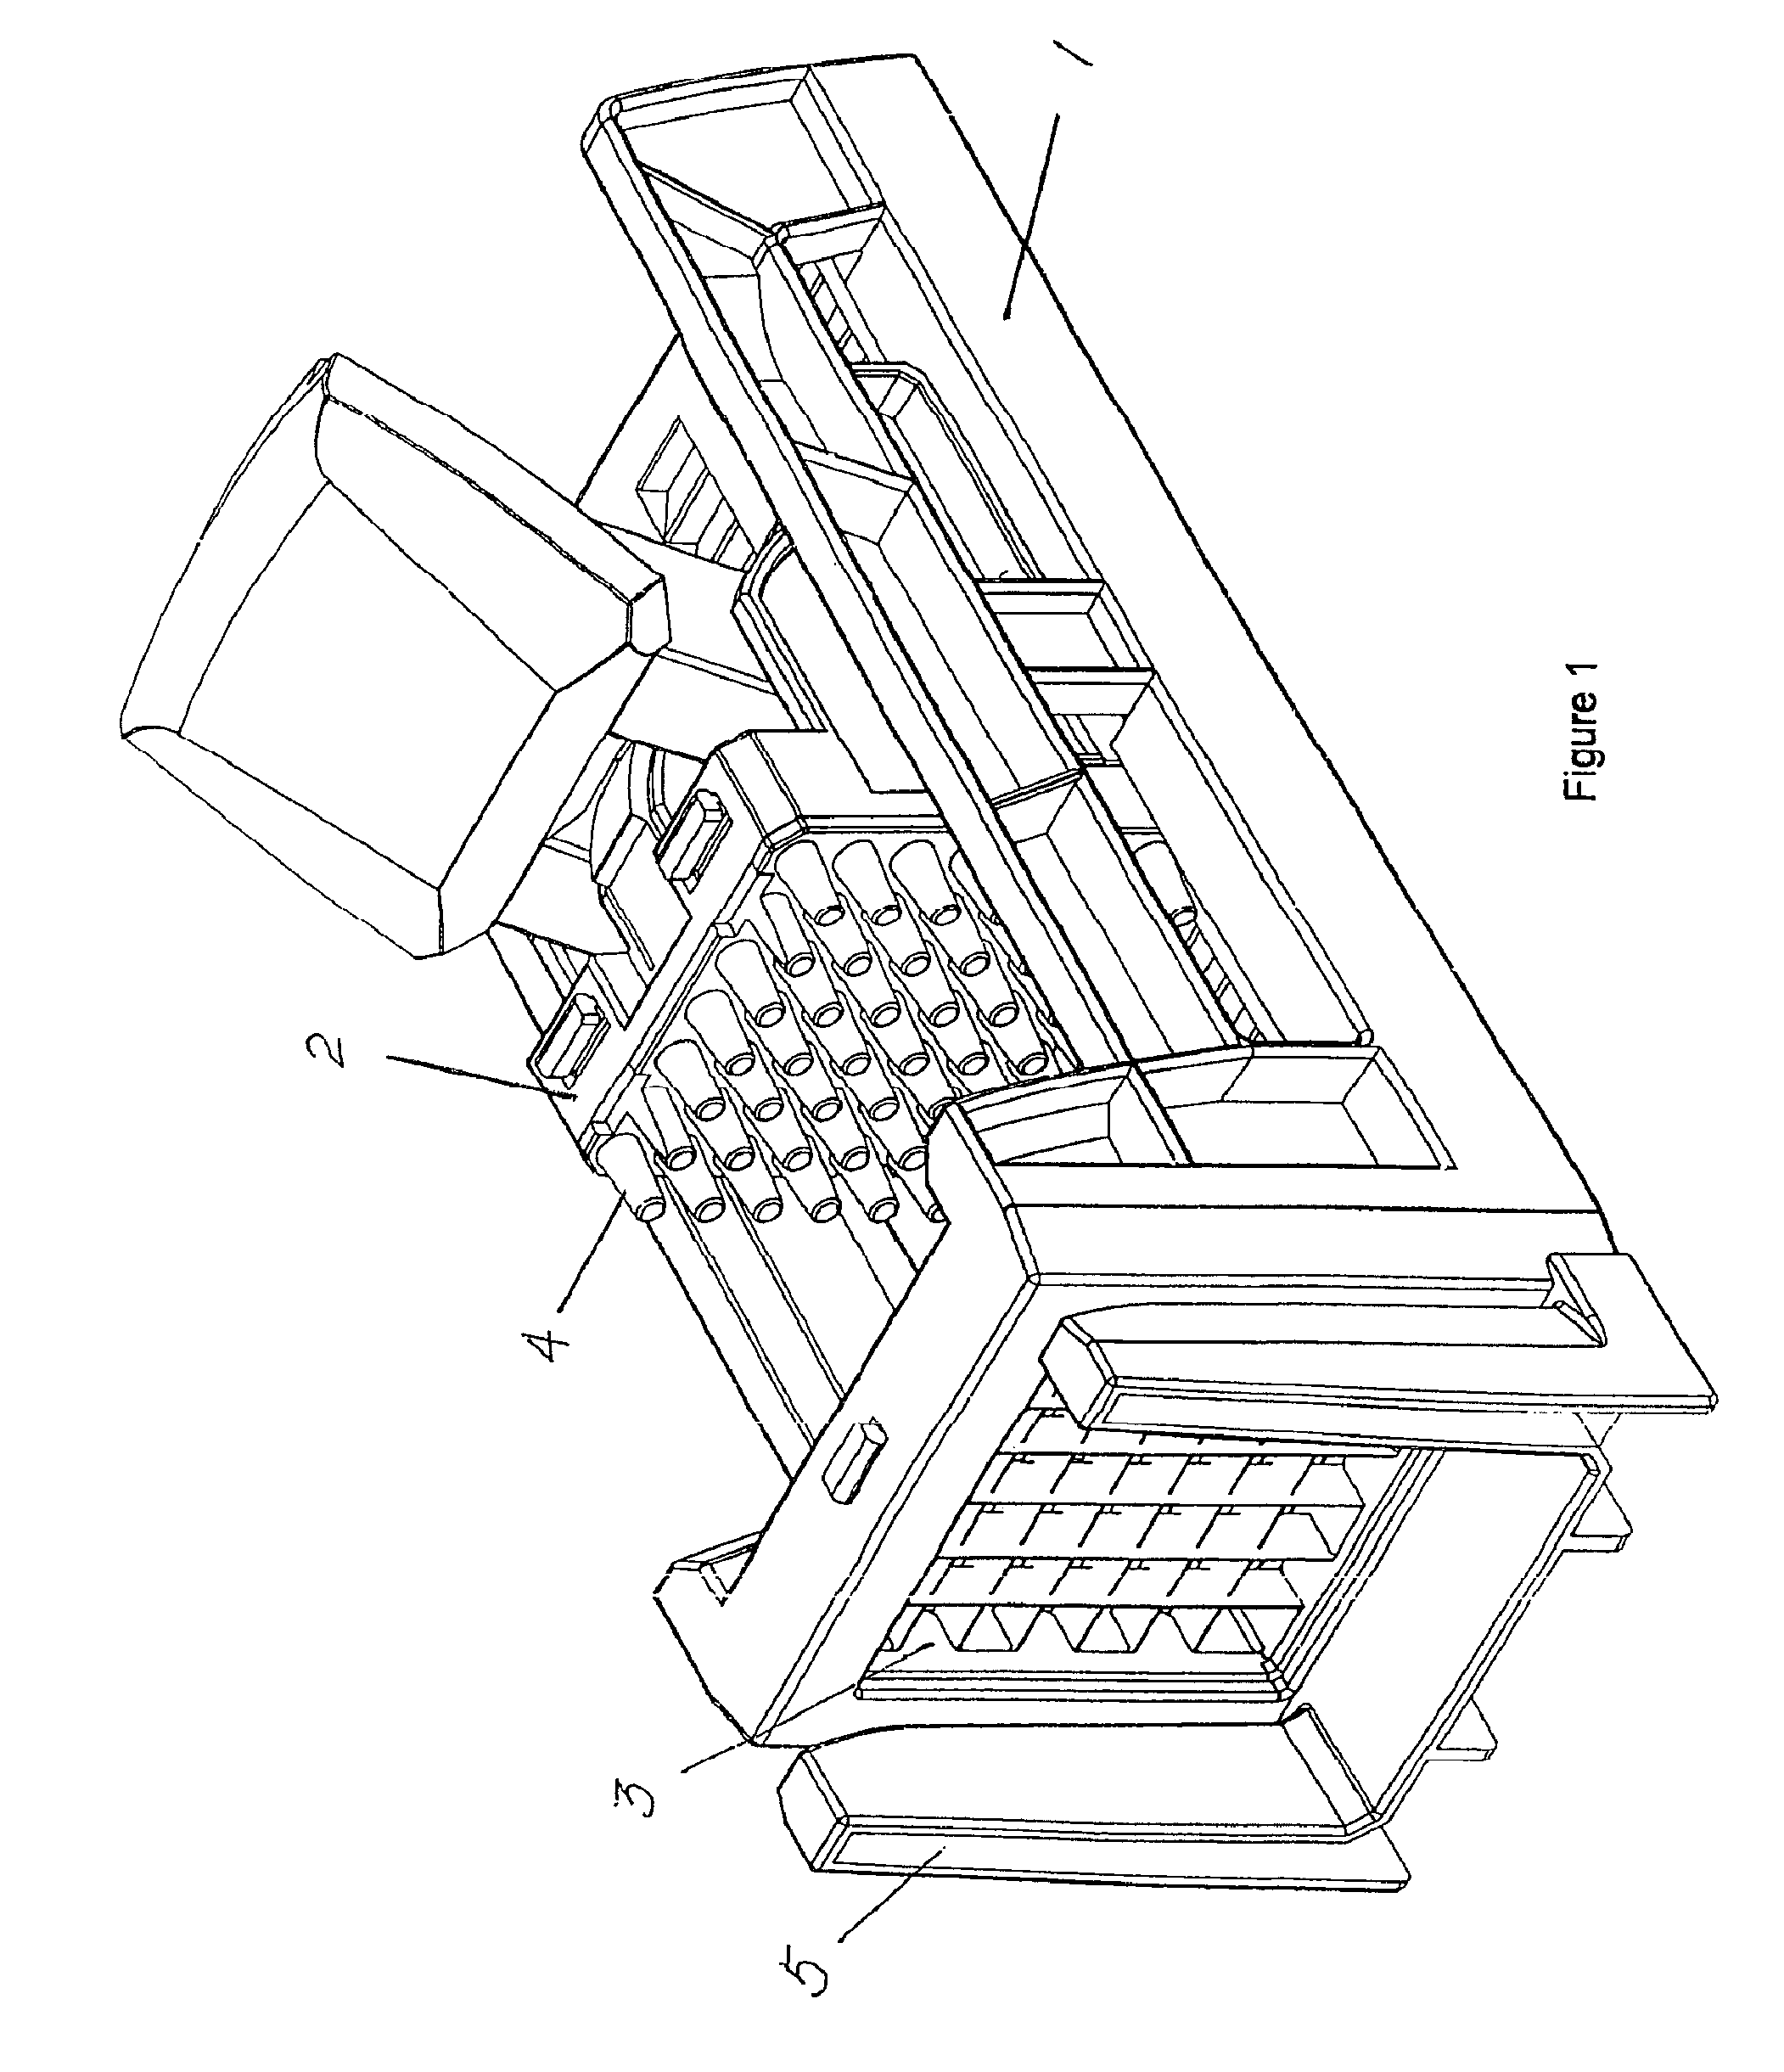 Hand-operated cutting apparatus